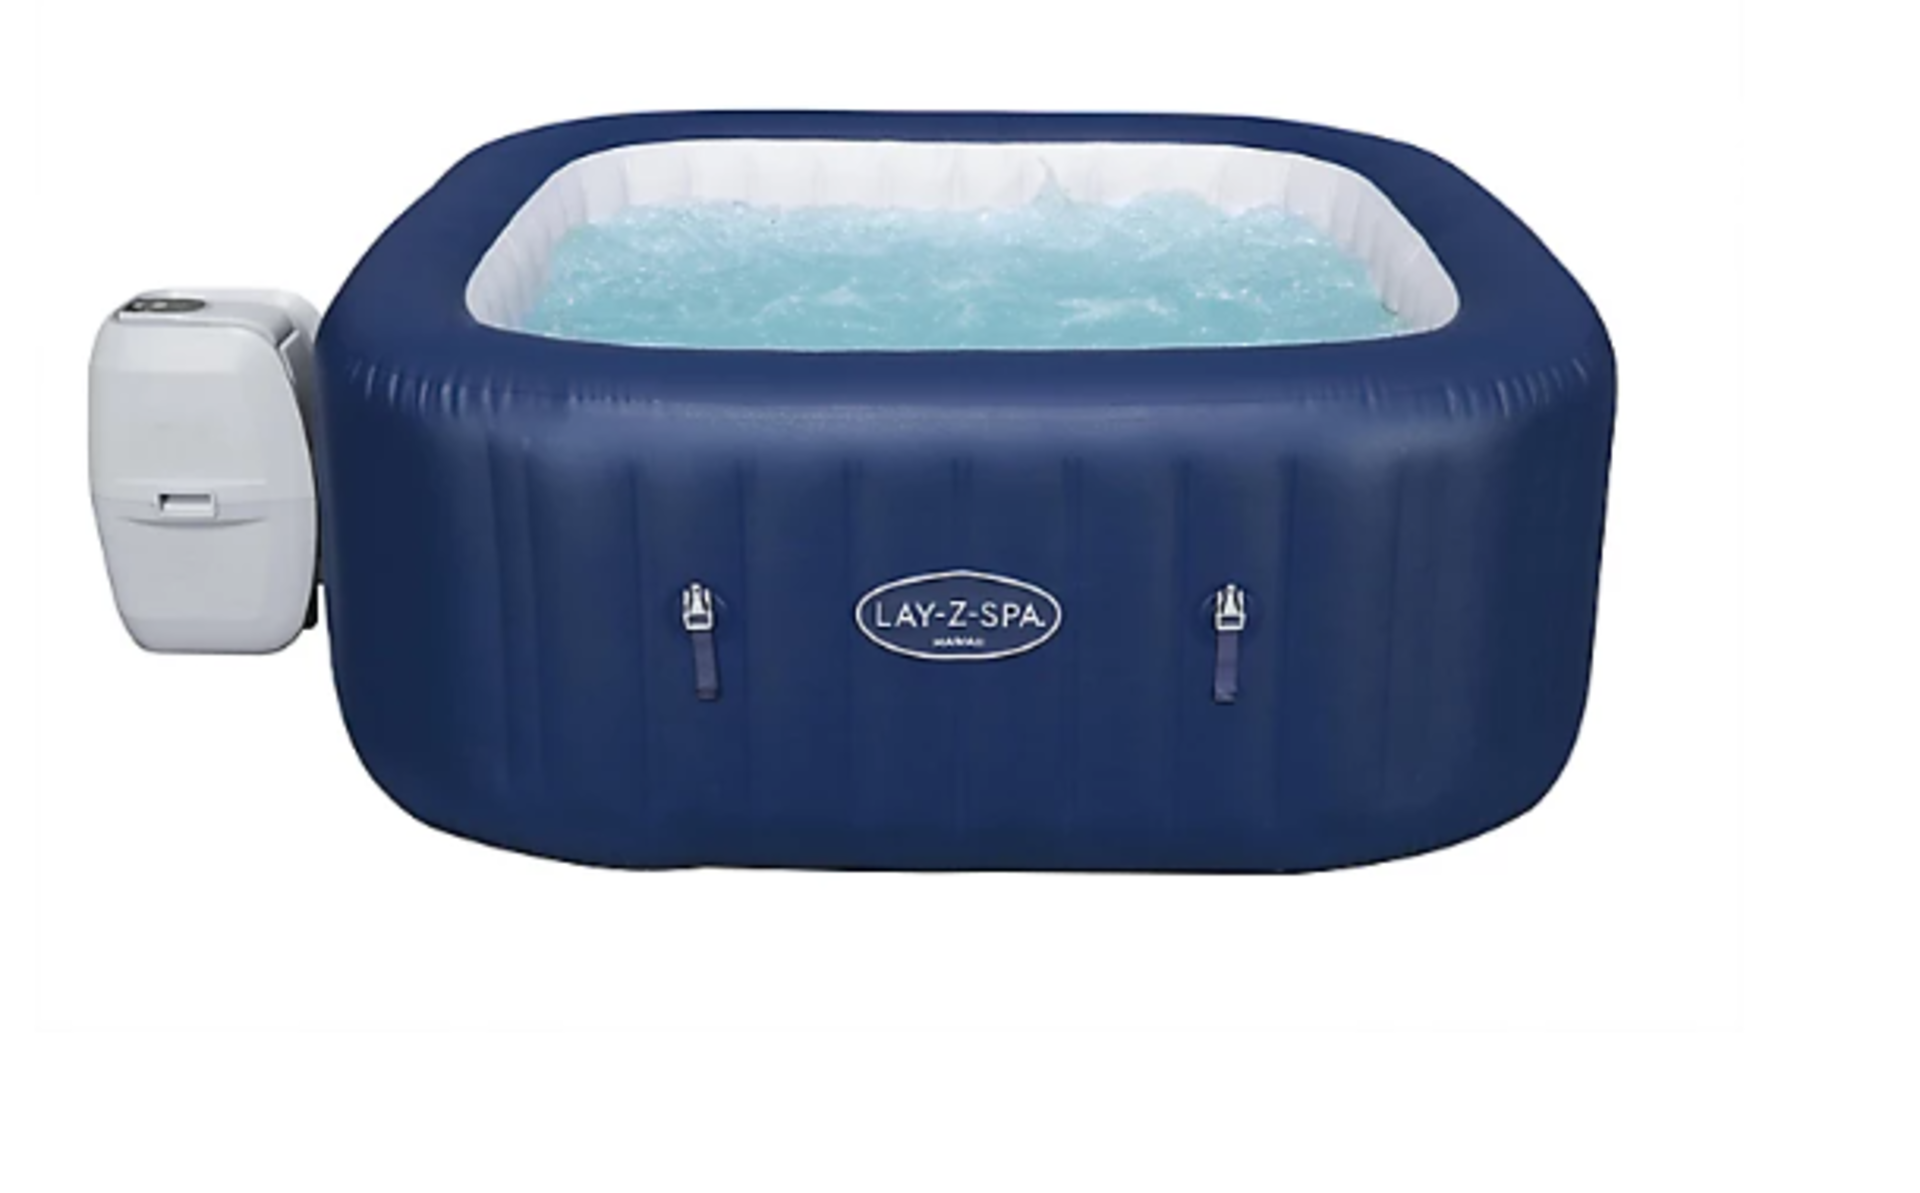 Lay-Z-Spa Hawaii Airjet 6 person Inflatable Hot Tub. - ER.RRP £450.00. The Lay-Z-Spa Hawaii